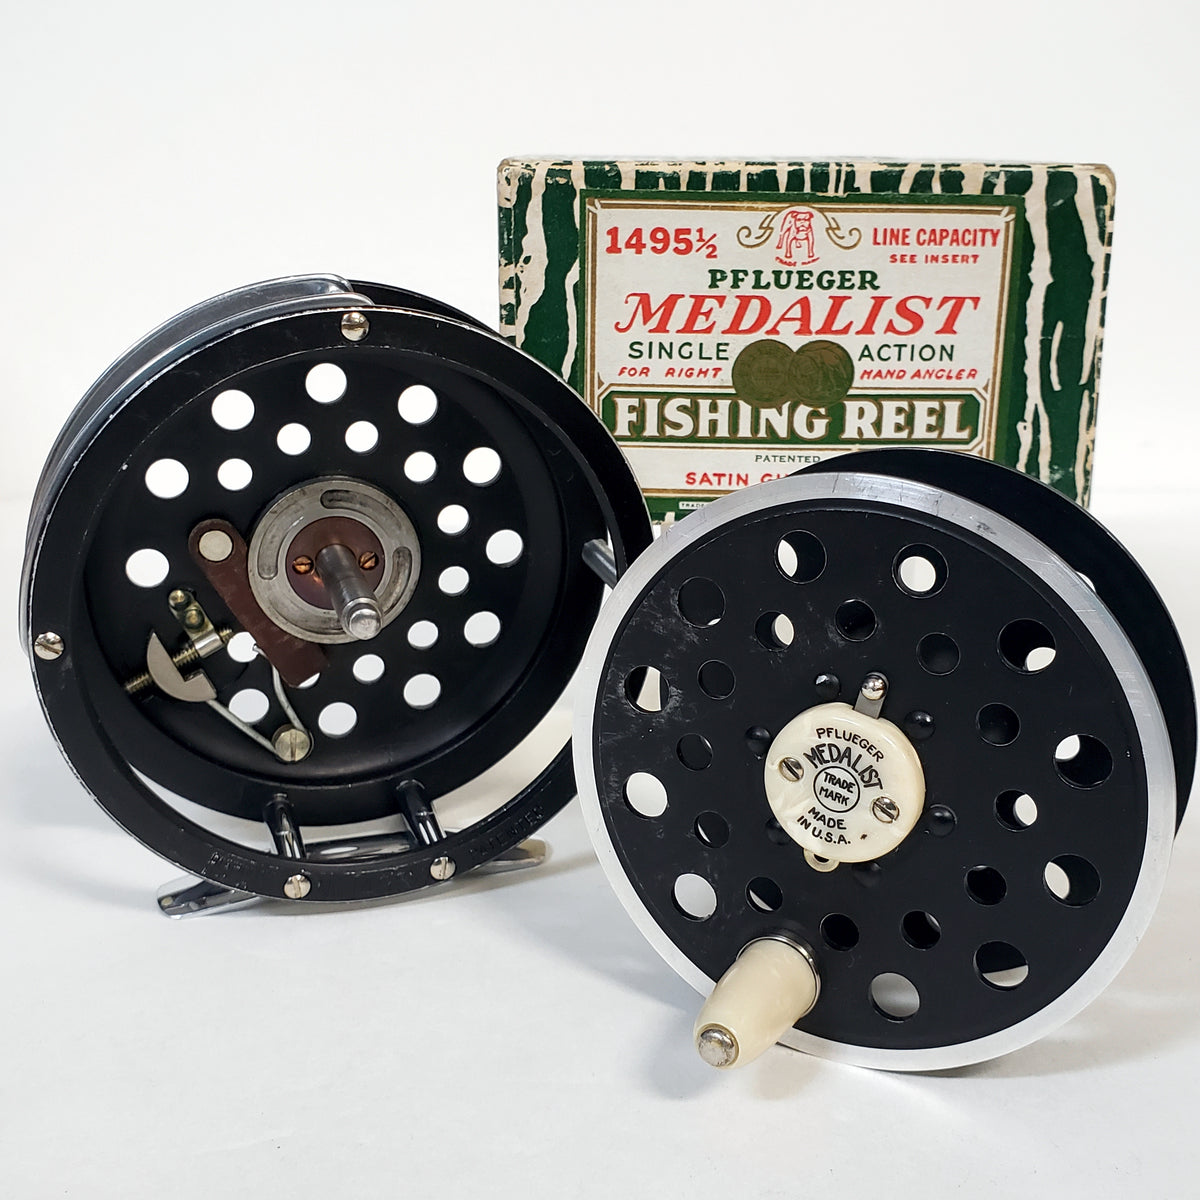 PFLUEGER MEDALIST FLY reel 1595 1/2 RC Excellent Condition Lightly Used  $35.00 - PicClick